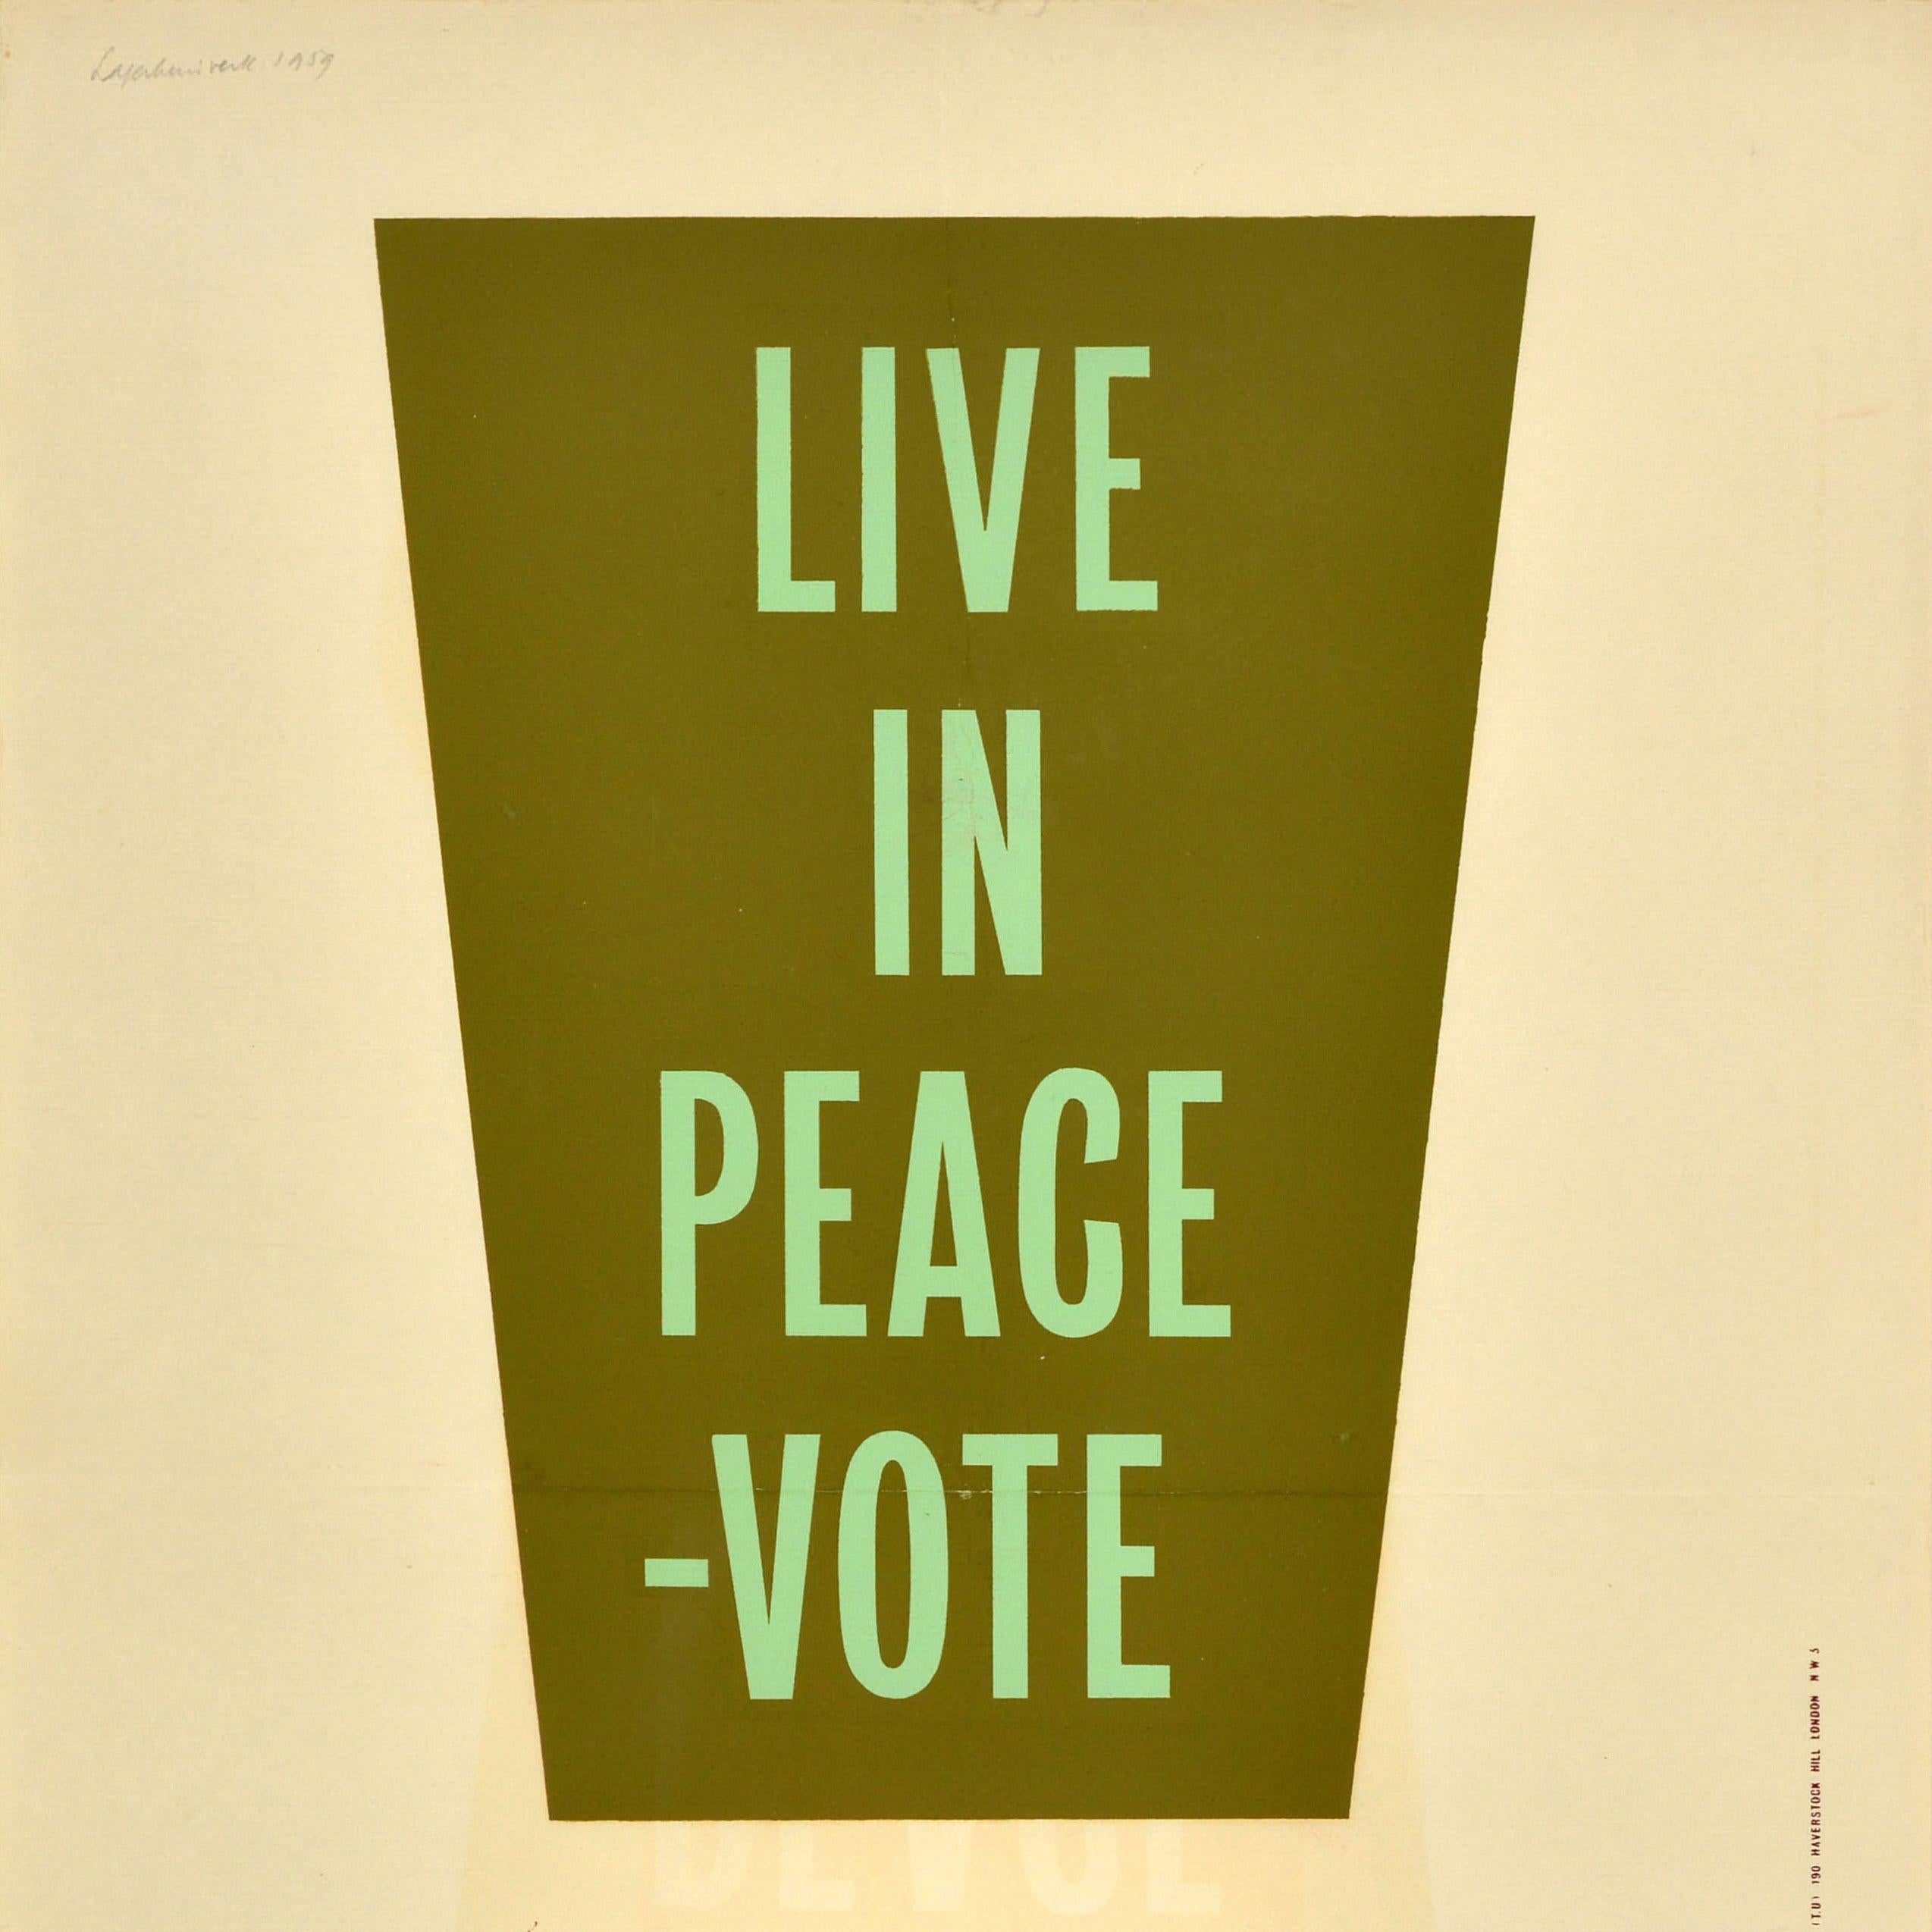 Original vintage political General Election poster issued by the Labour Party - Live in Peace Vote Labour - featuring a dynamic design with the bold text inside an exclamation mark. Printed by Studio Torrow Ltd. Good condition, folds, creasing,